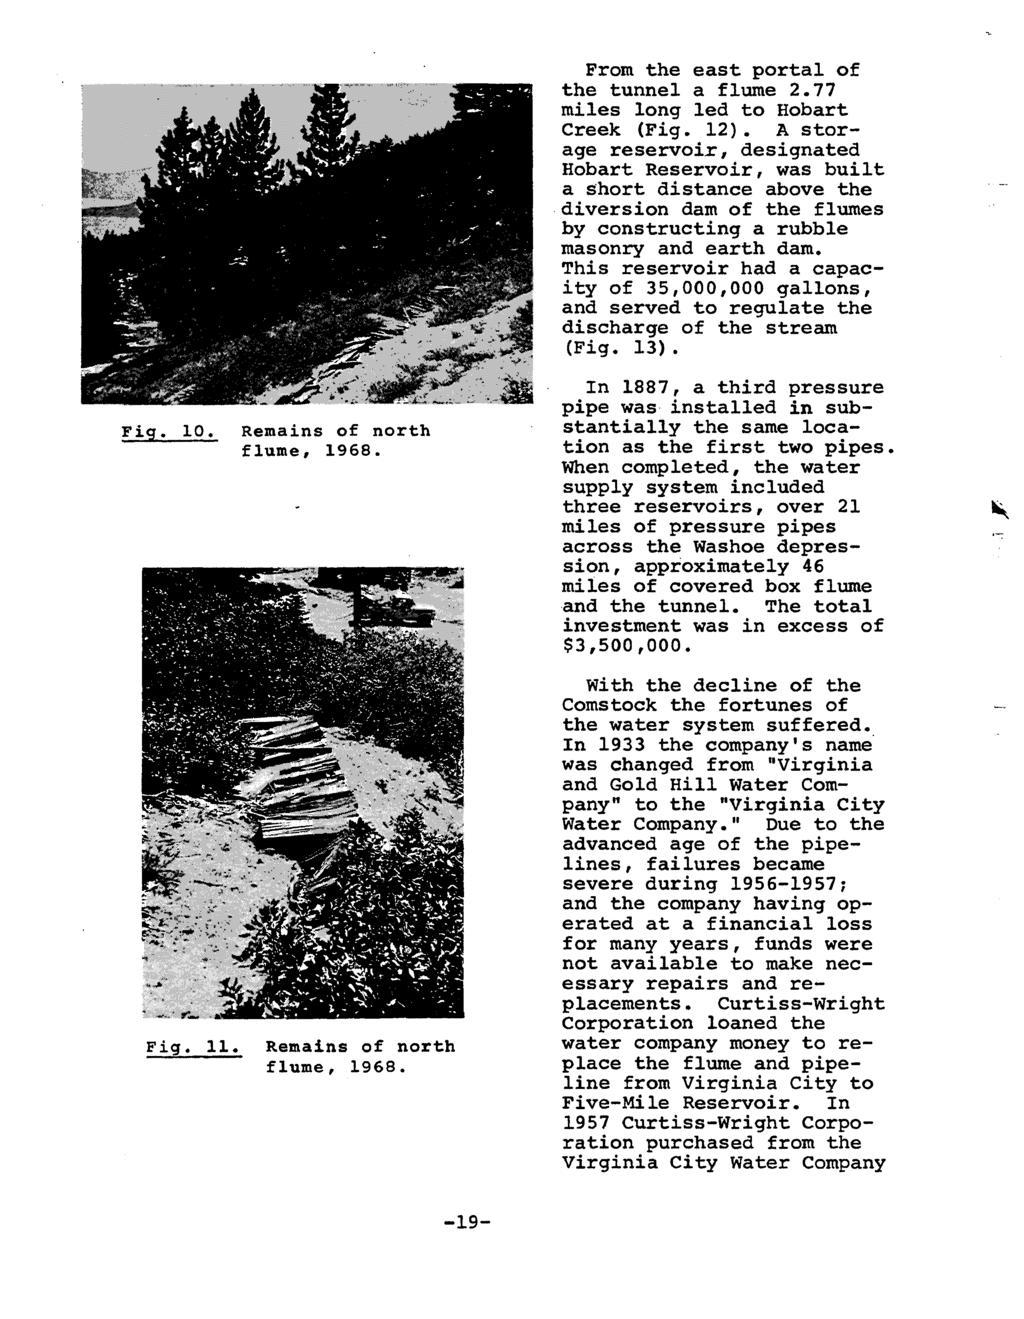 Fig. 10. Remains of north flume, 1968. From the east portal of the tunnel a flume 2.77 miles long led to Hobart Creek (Fig. 12).